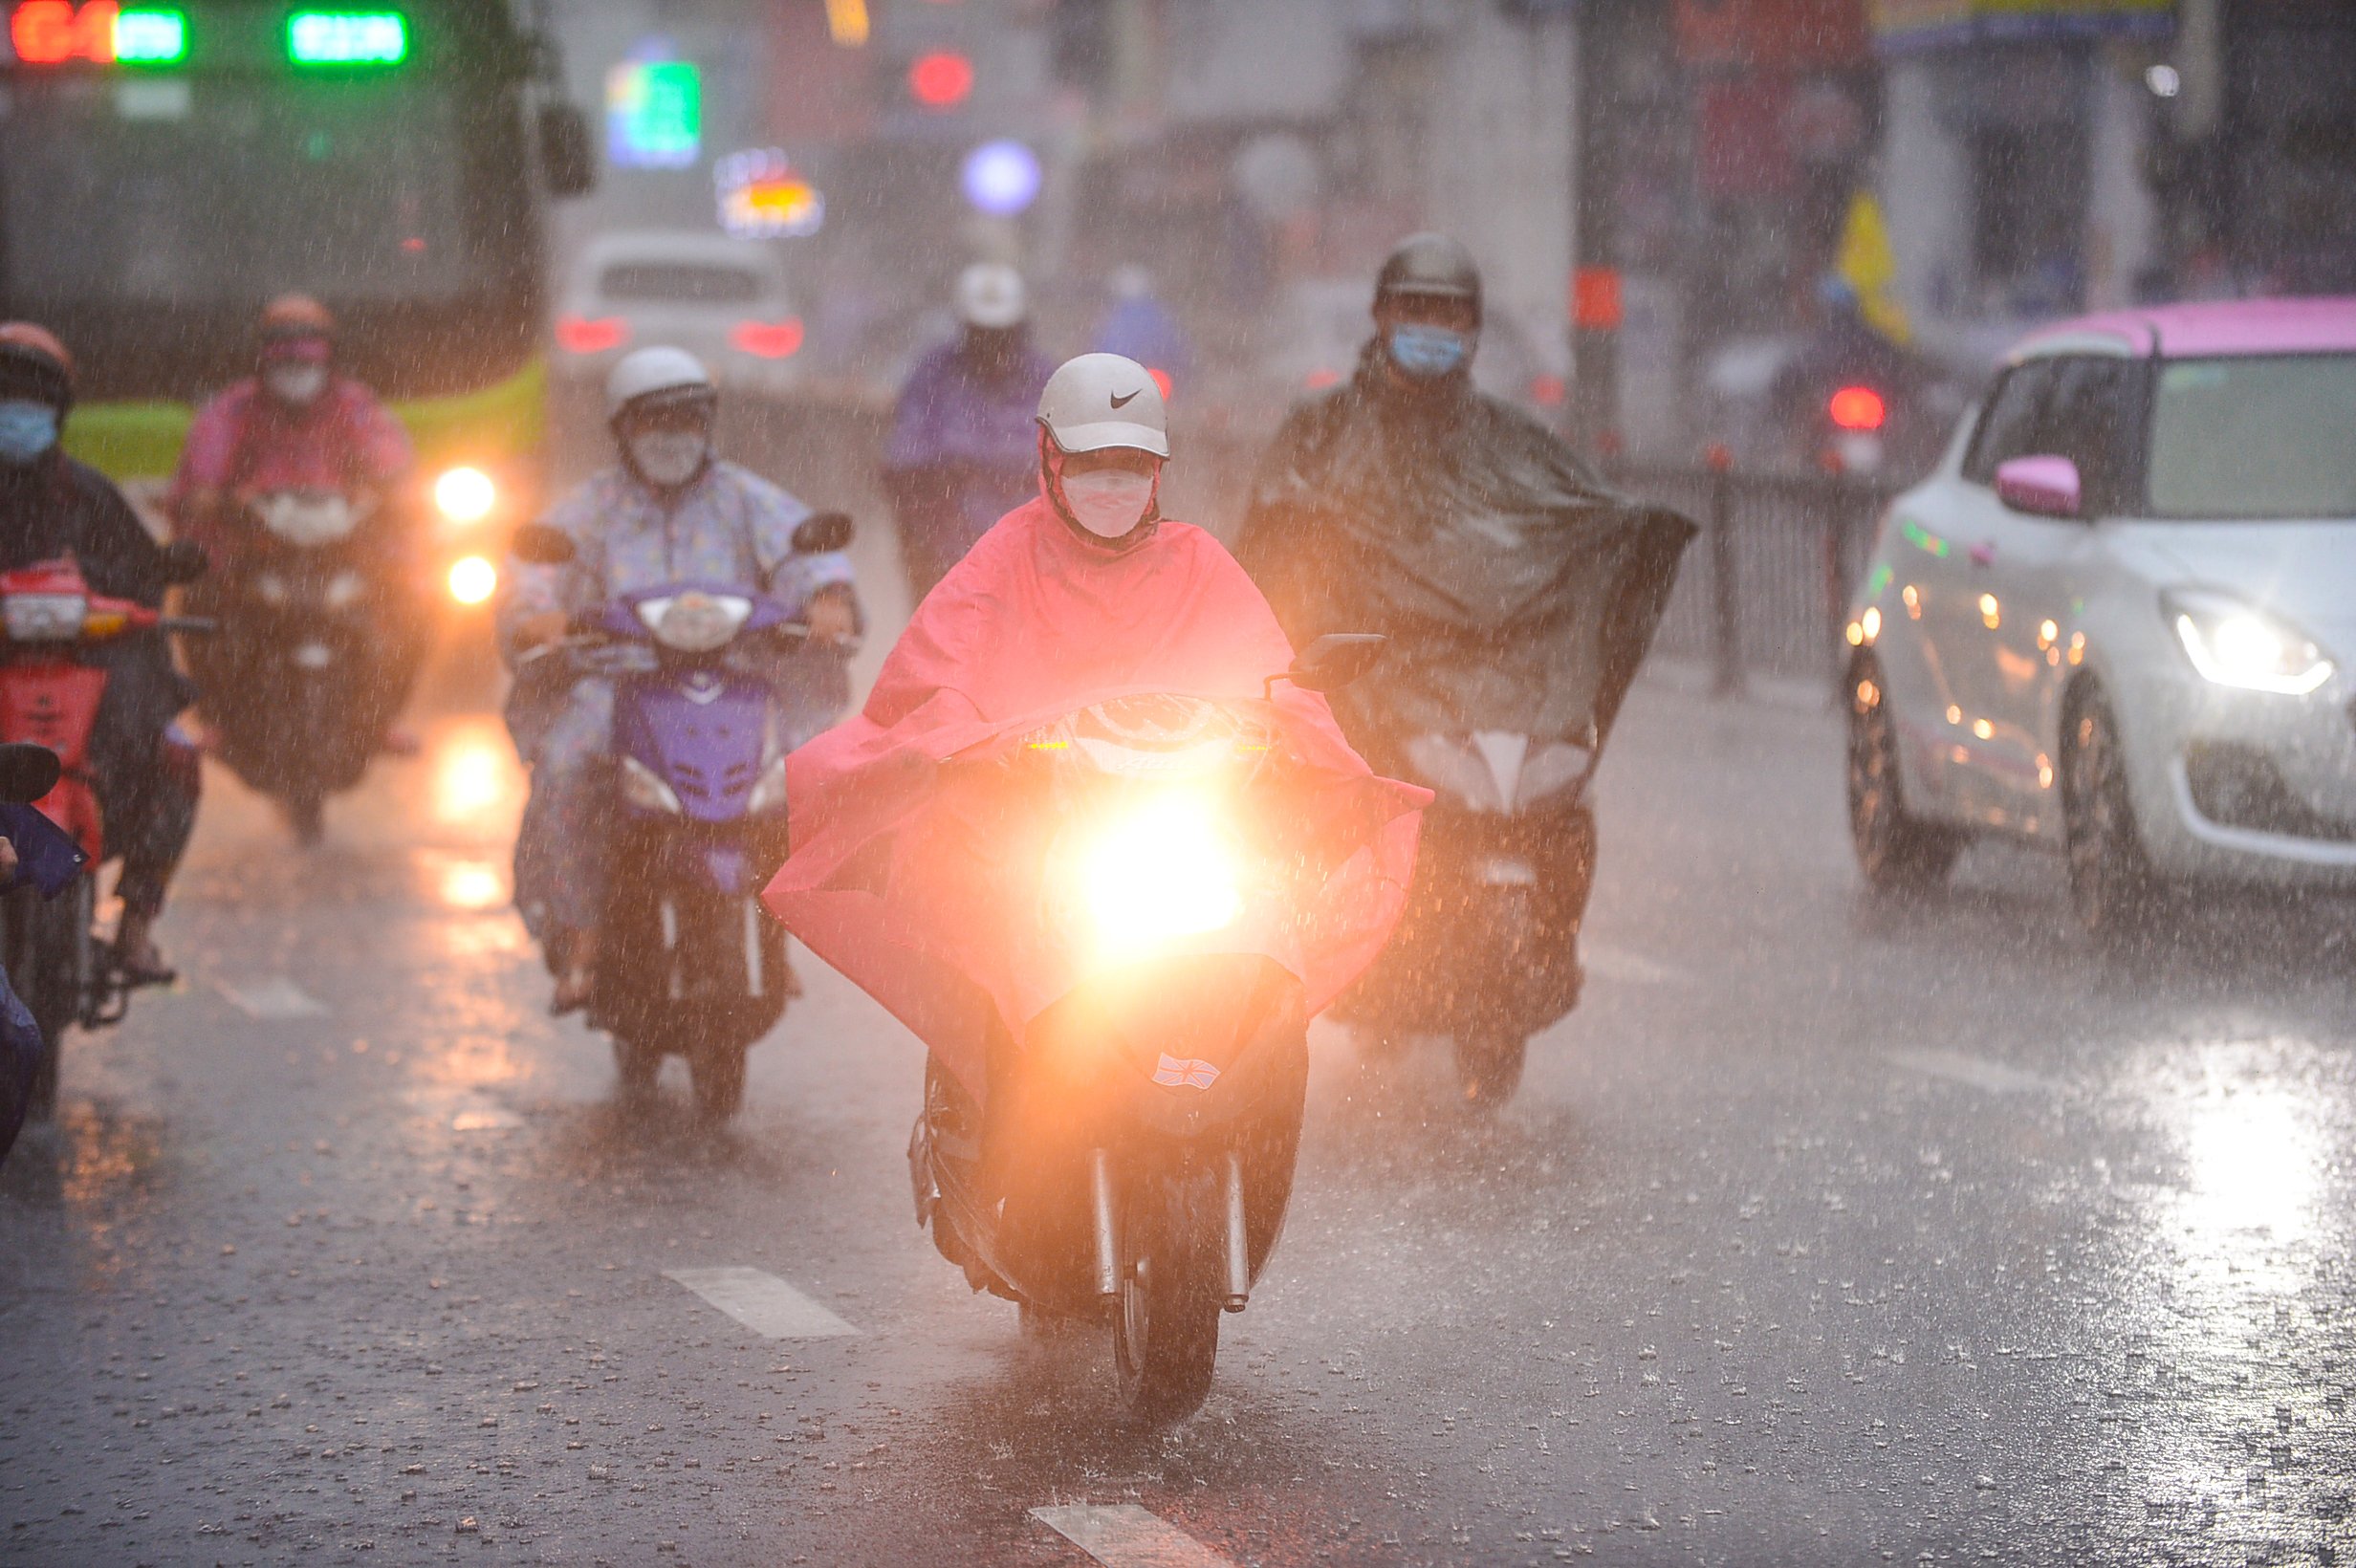 People travel under heavy rains on Hoang Van Thu Street in Phu Nhuan District, Ho Chi Minh City, June 2, 2022. Photo: Quang Dinh / Tuoi Tre